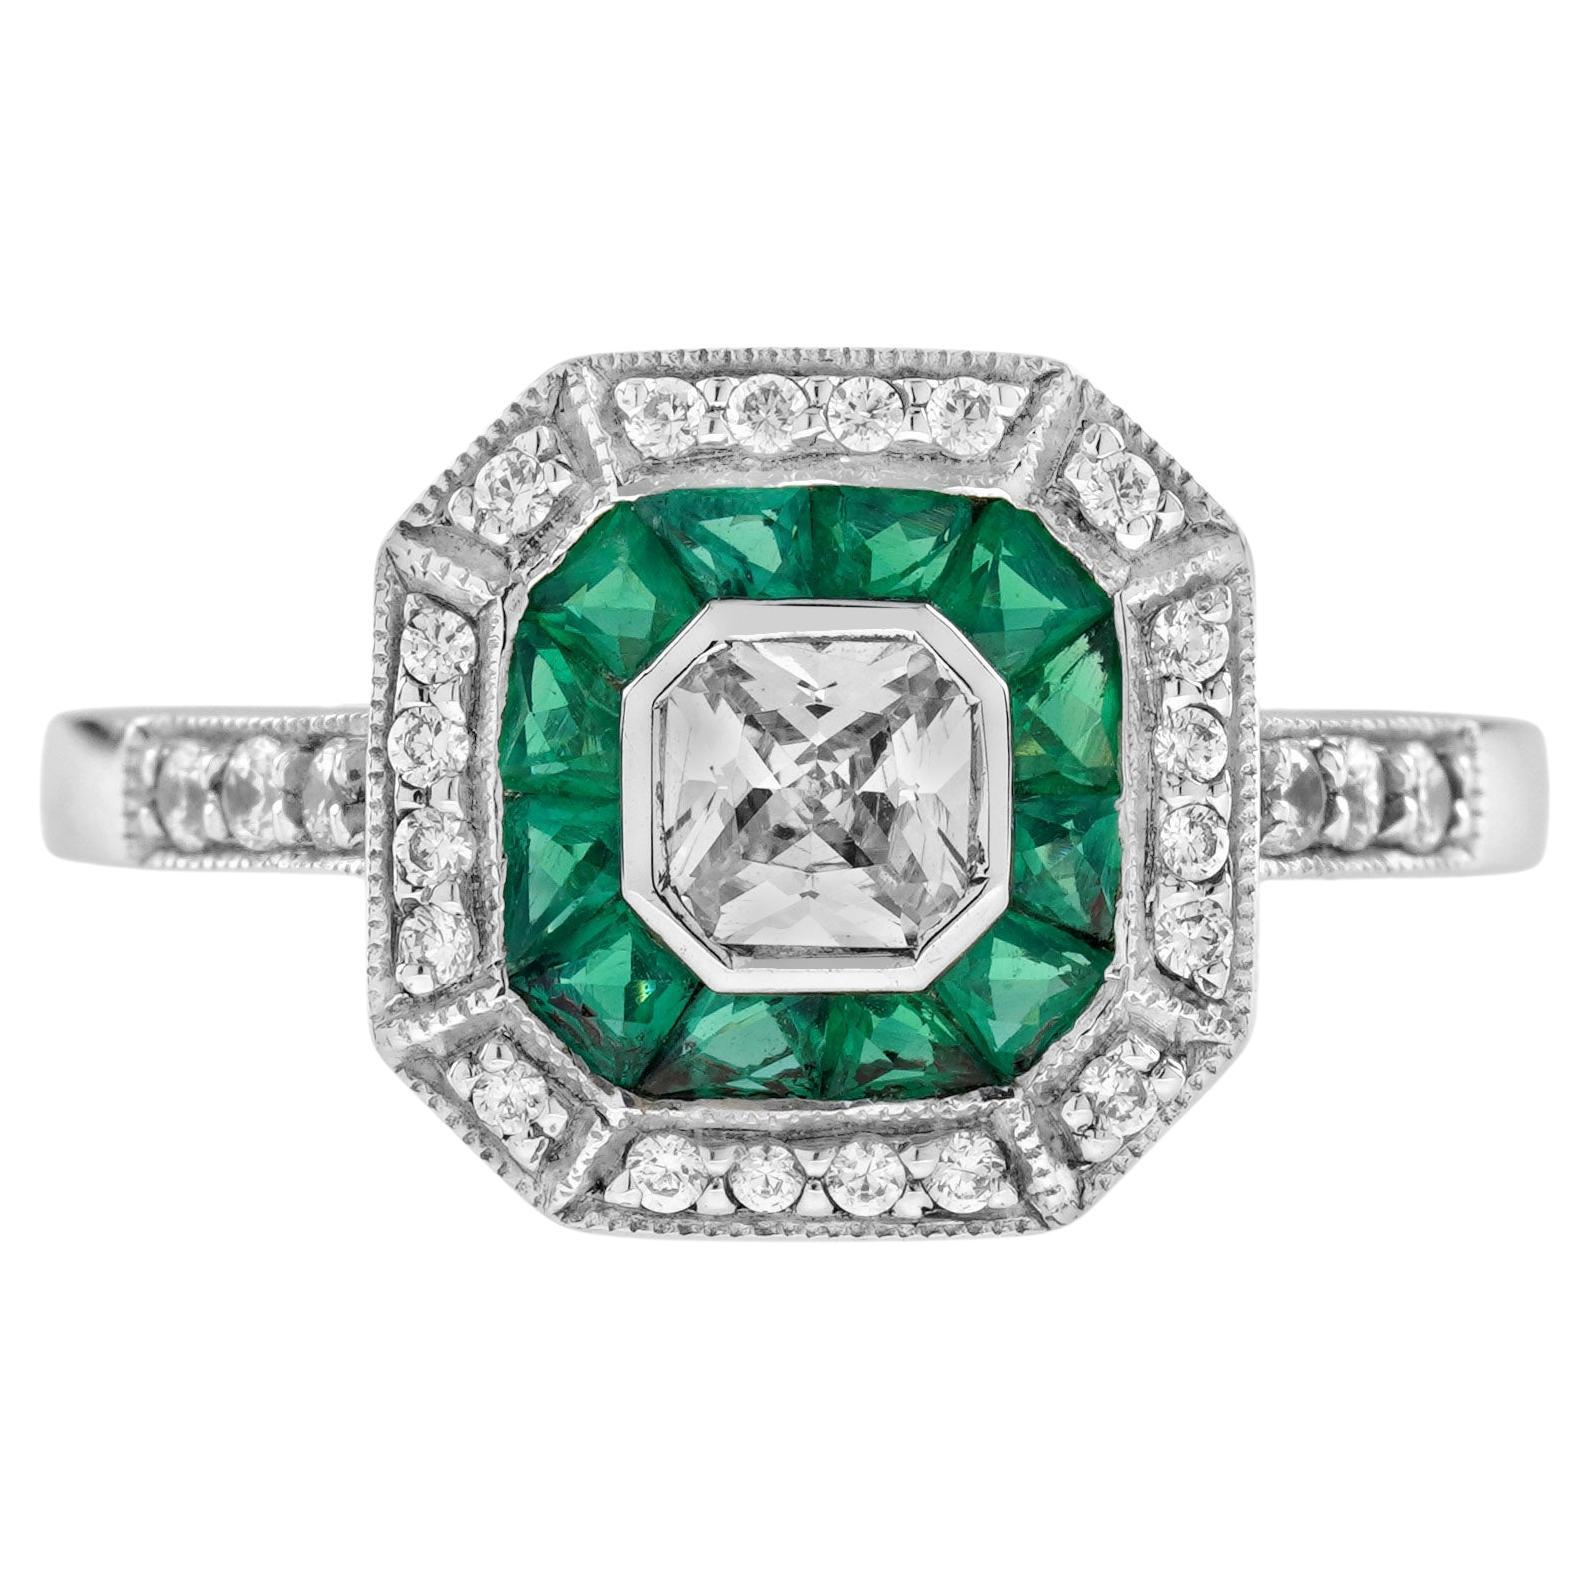 Diamond and Emerald Double Halo Art Deco Style Engagement Ring in 18K White Gold